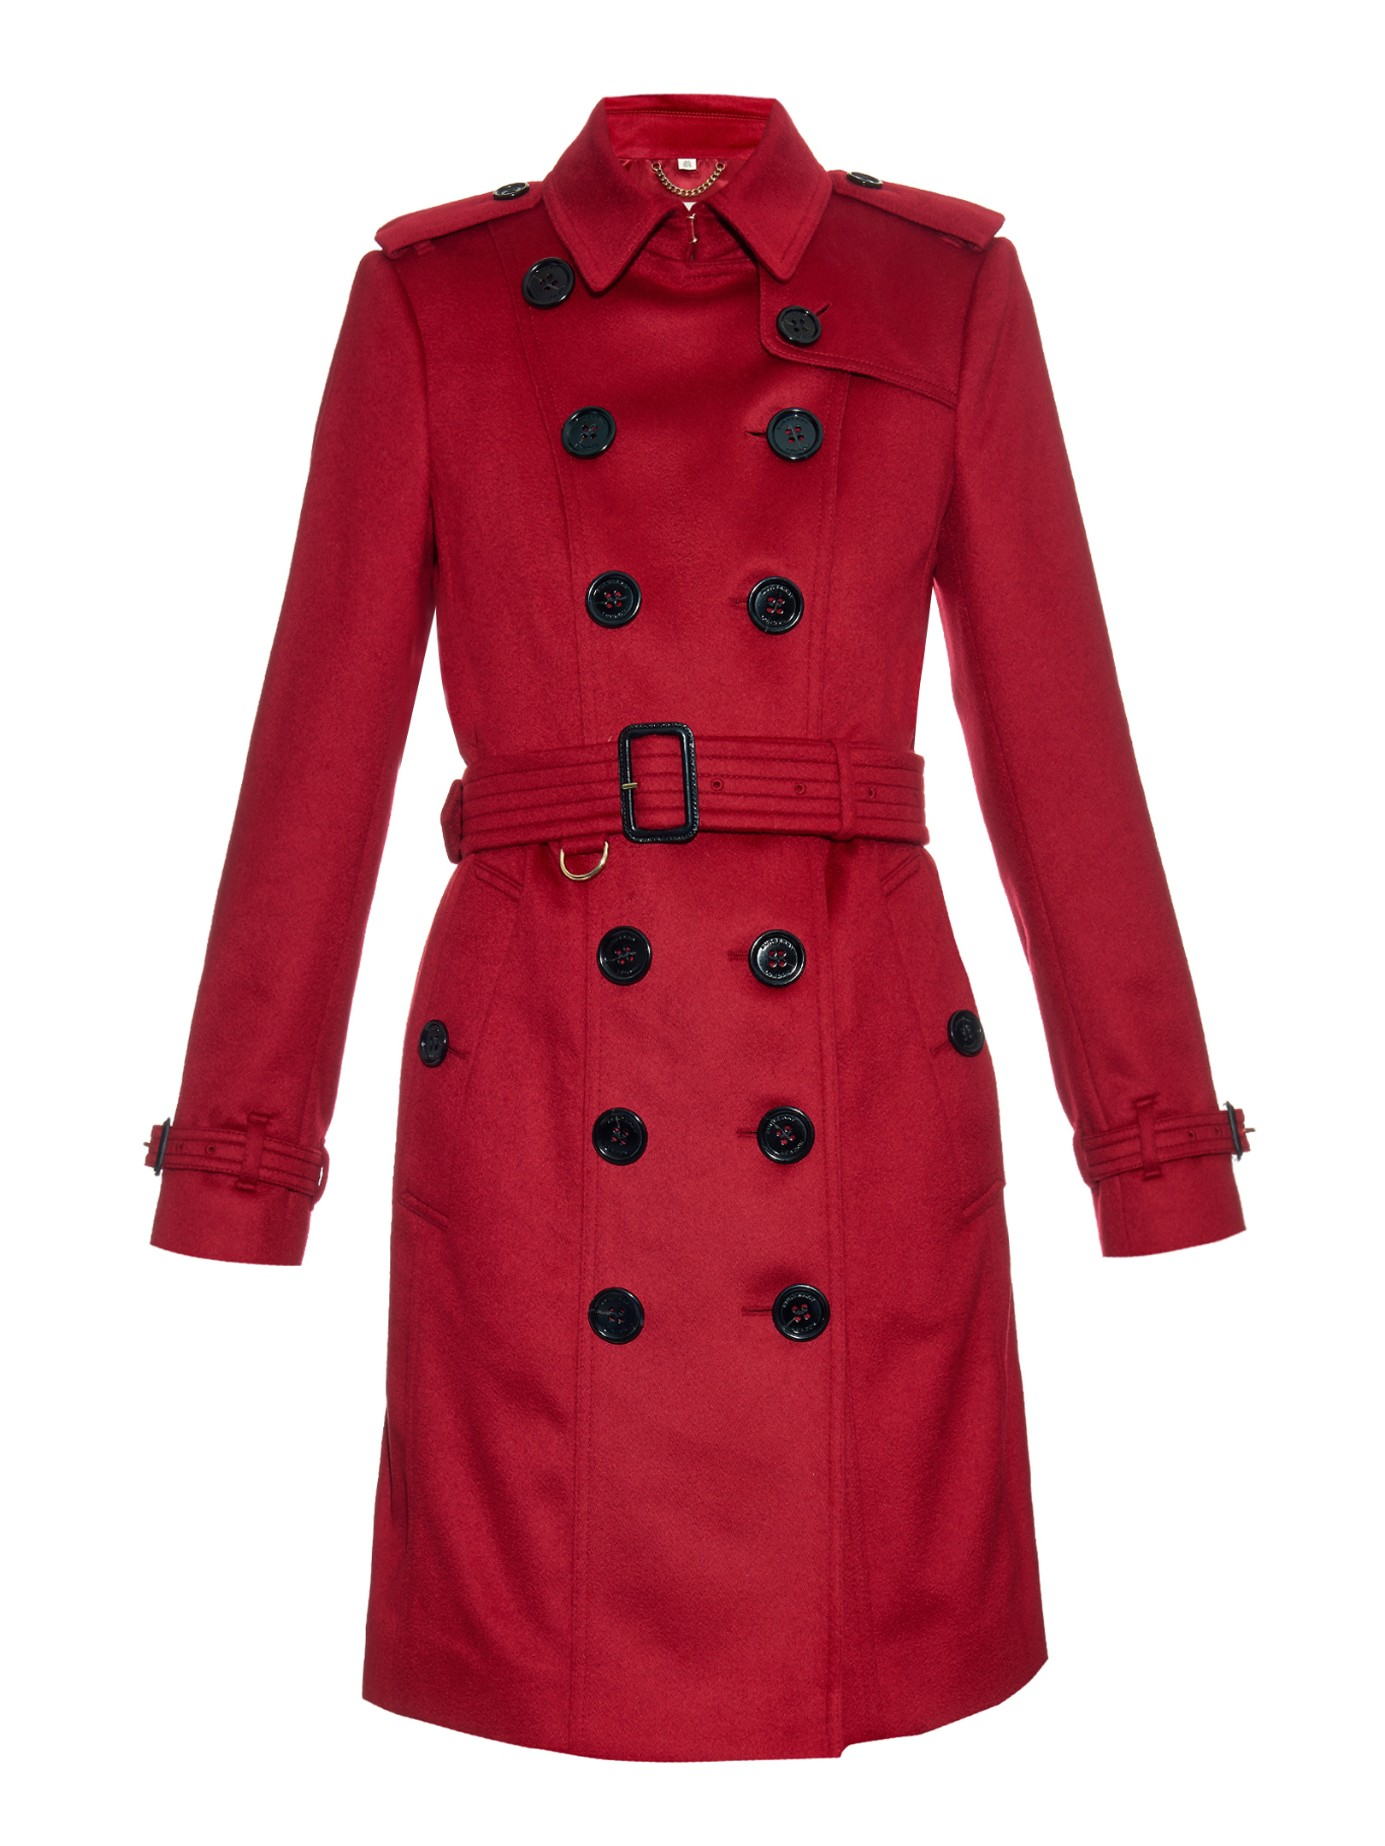 Lyst - Burberry Sandringham Long Cashmere Trench Coat in Red